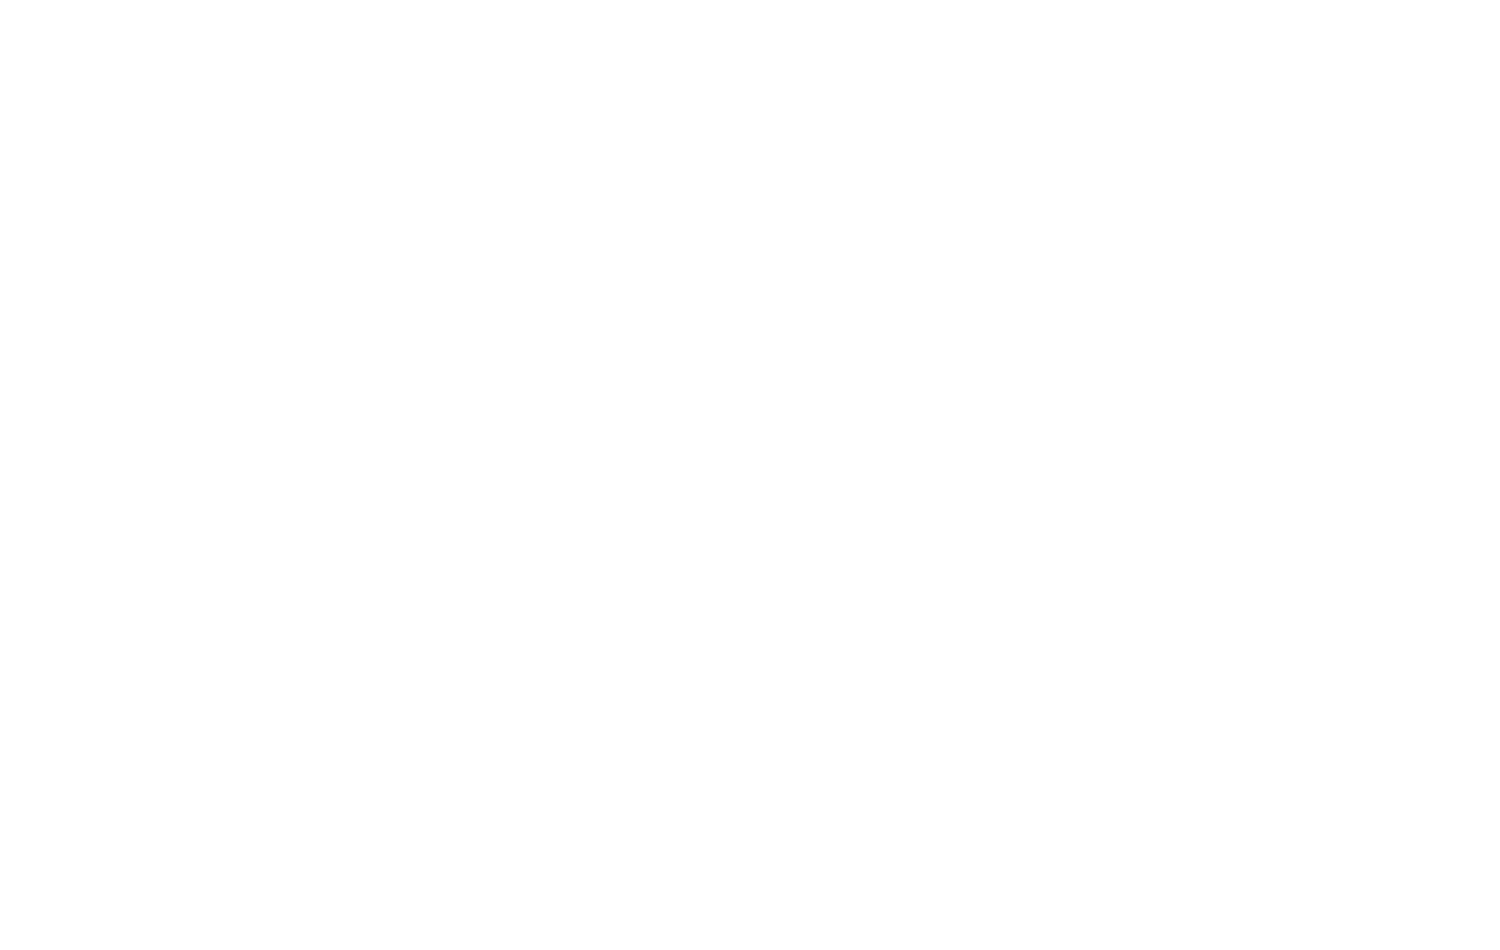 Poetry for Good